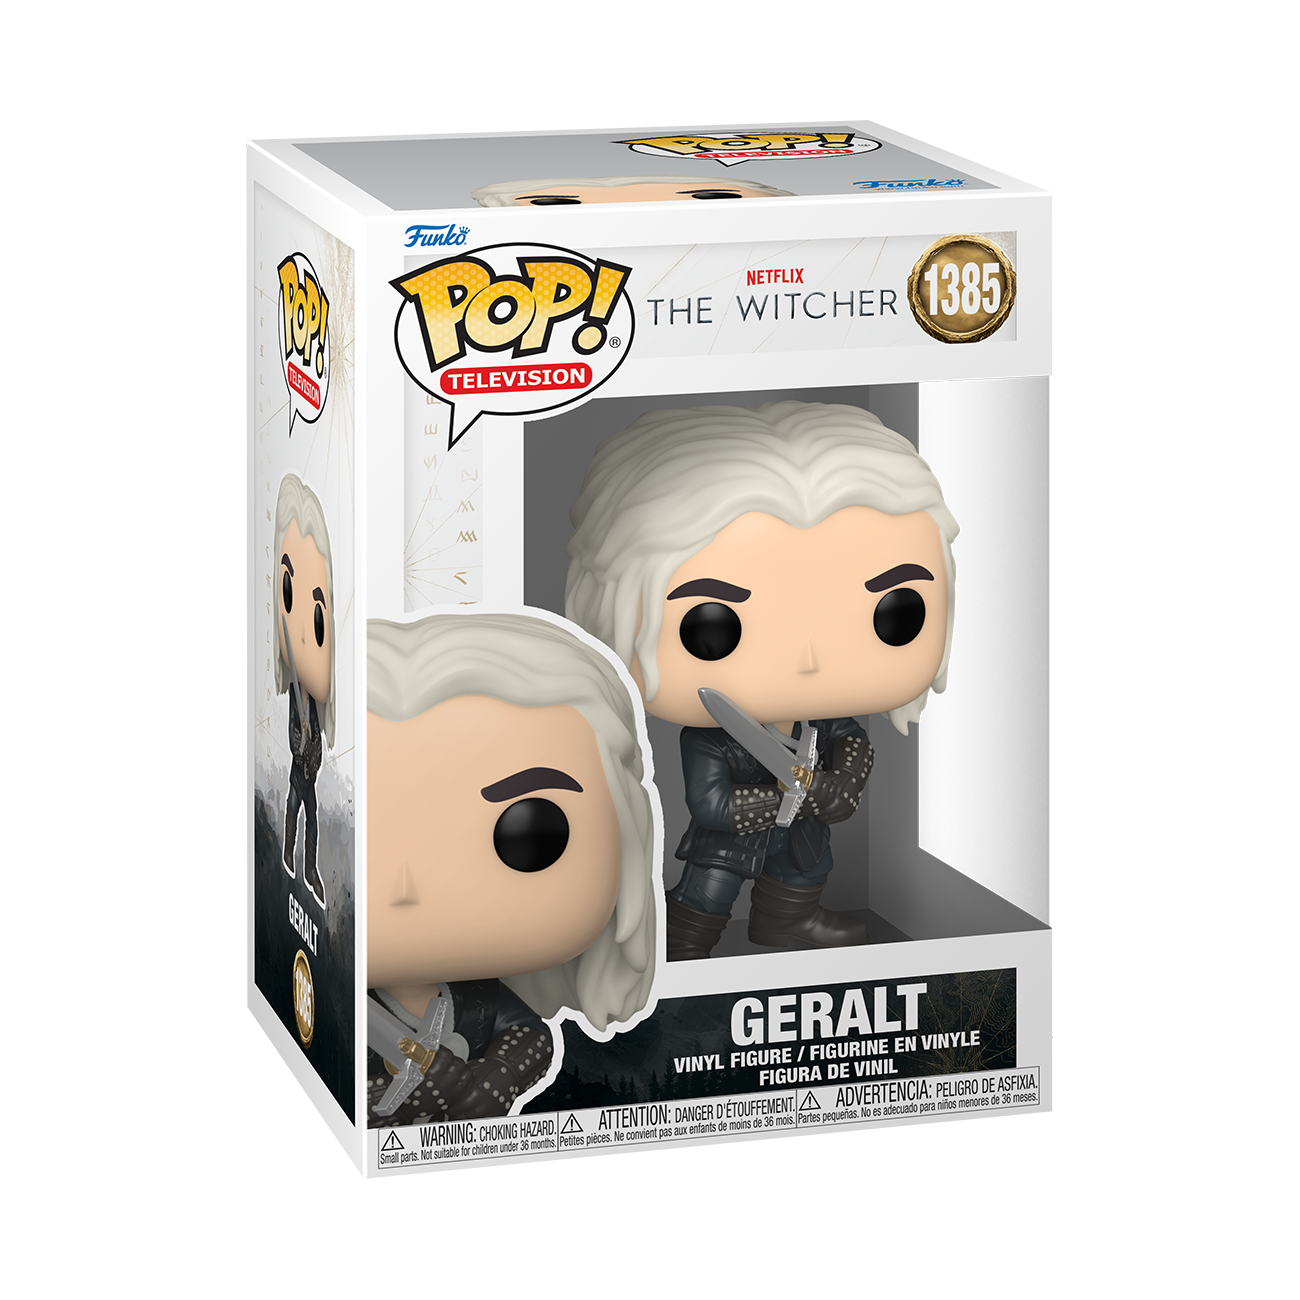 Funko Pop - The Witcher 2 - Geralt with Sword